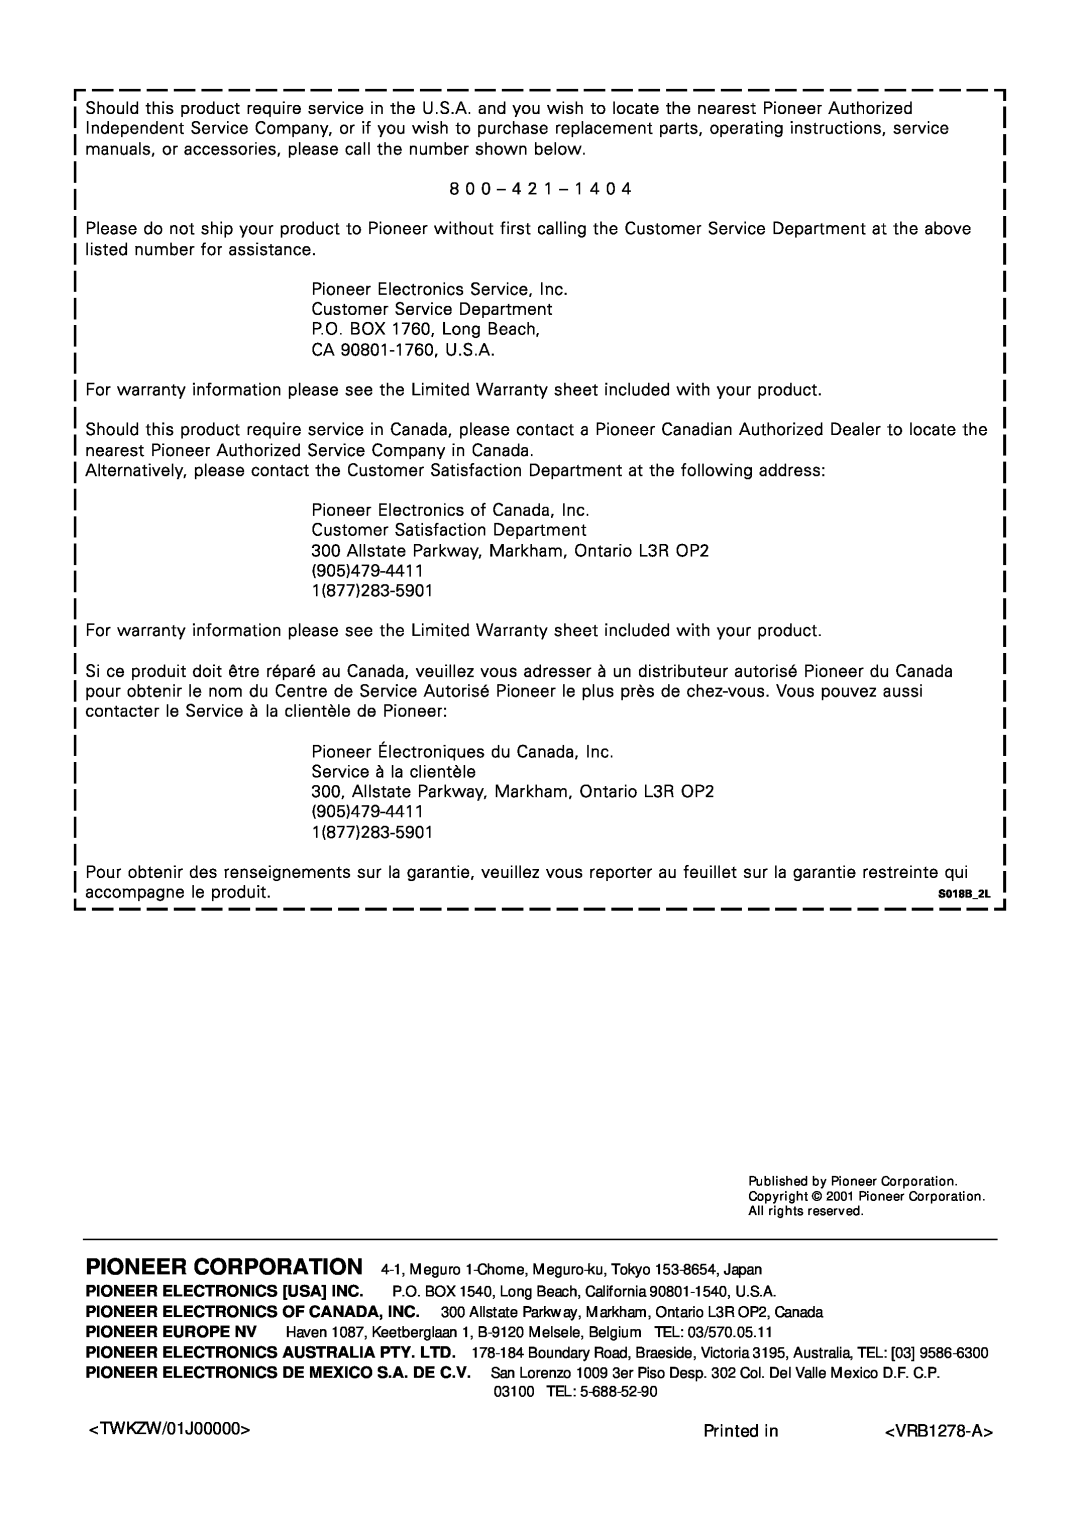 Pioneer DV-S733A operating instructions TWKZW/01J00000, Printed in, VRB1278-A 